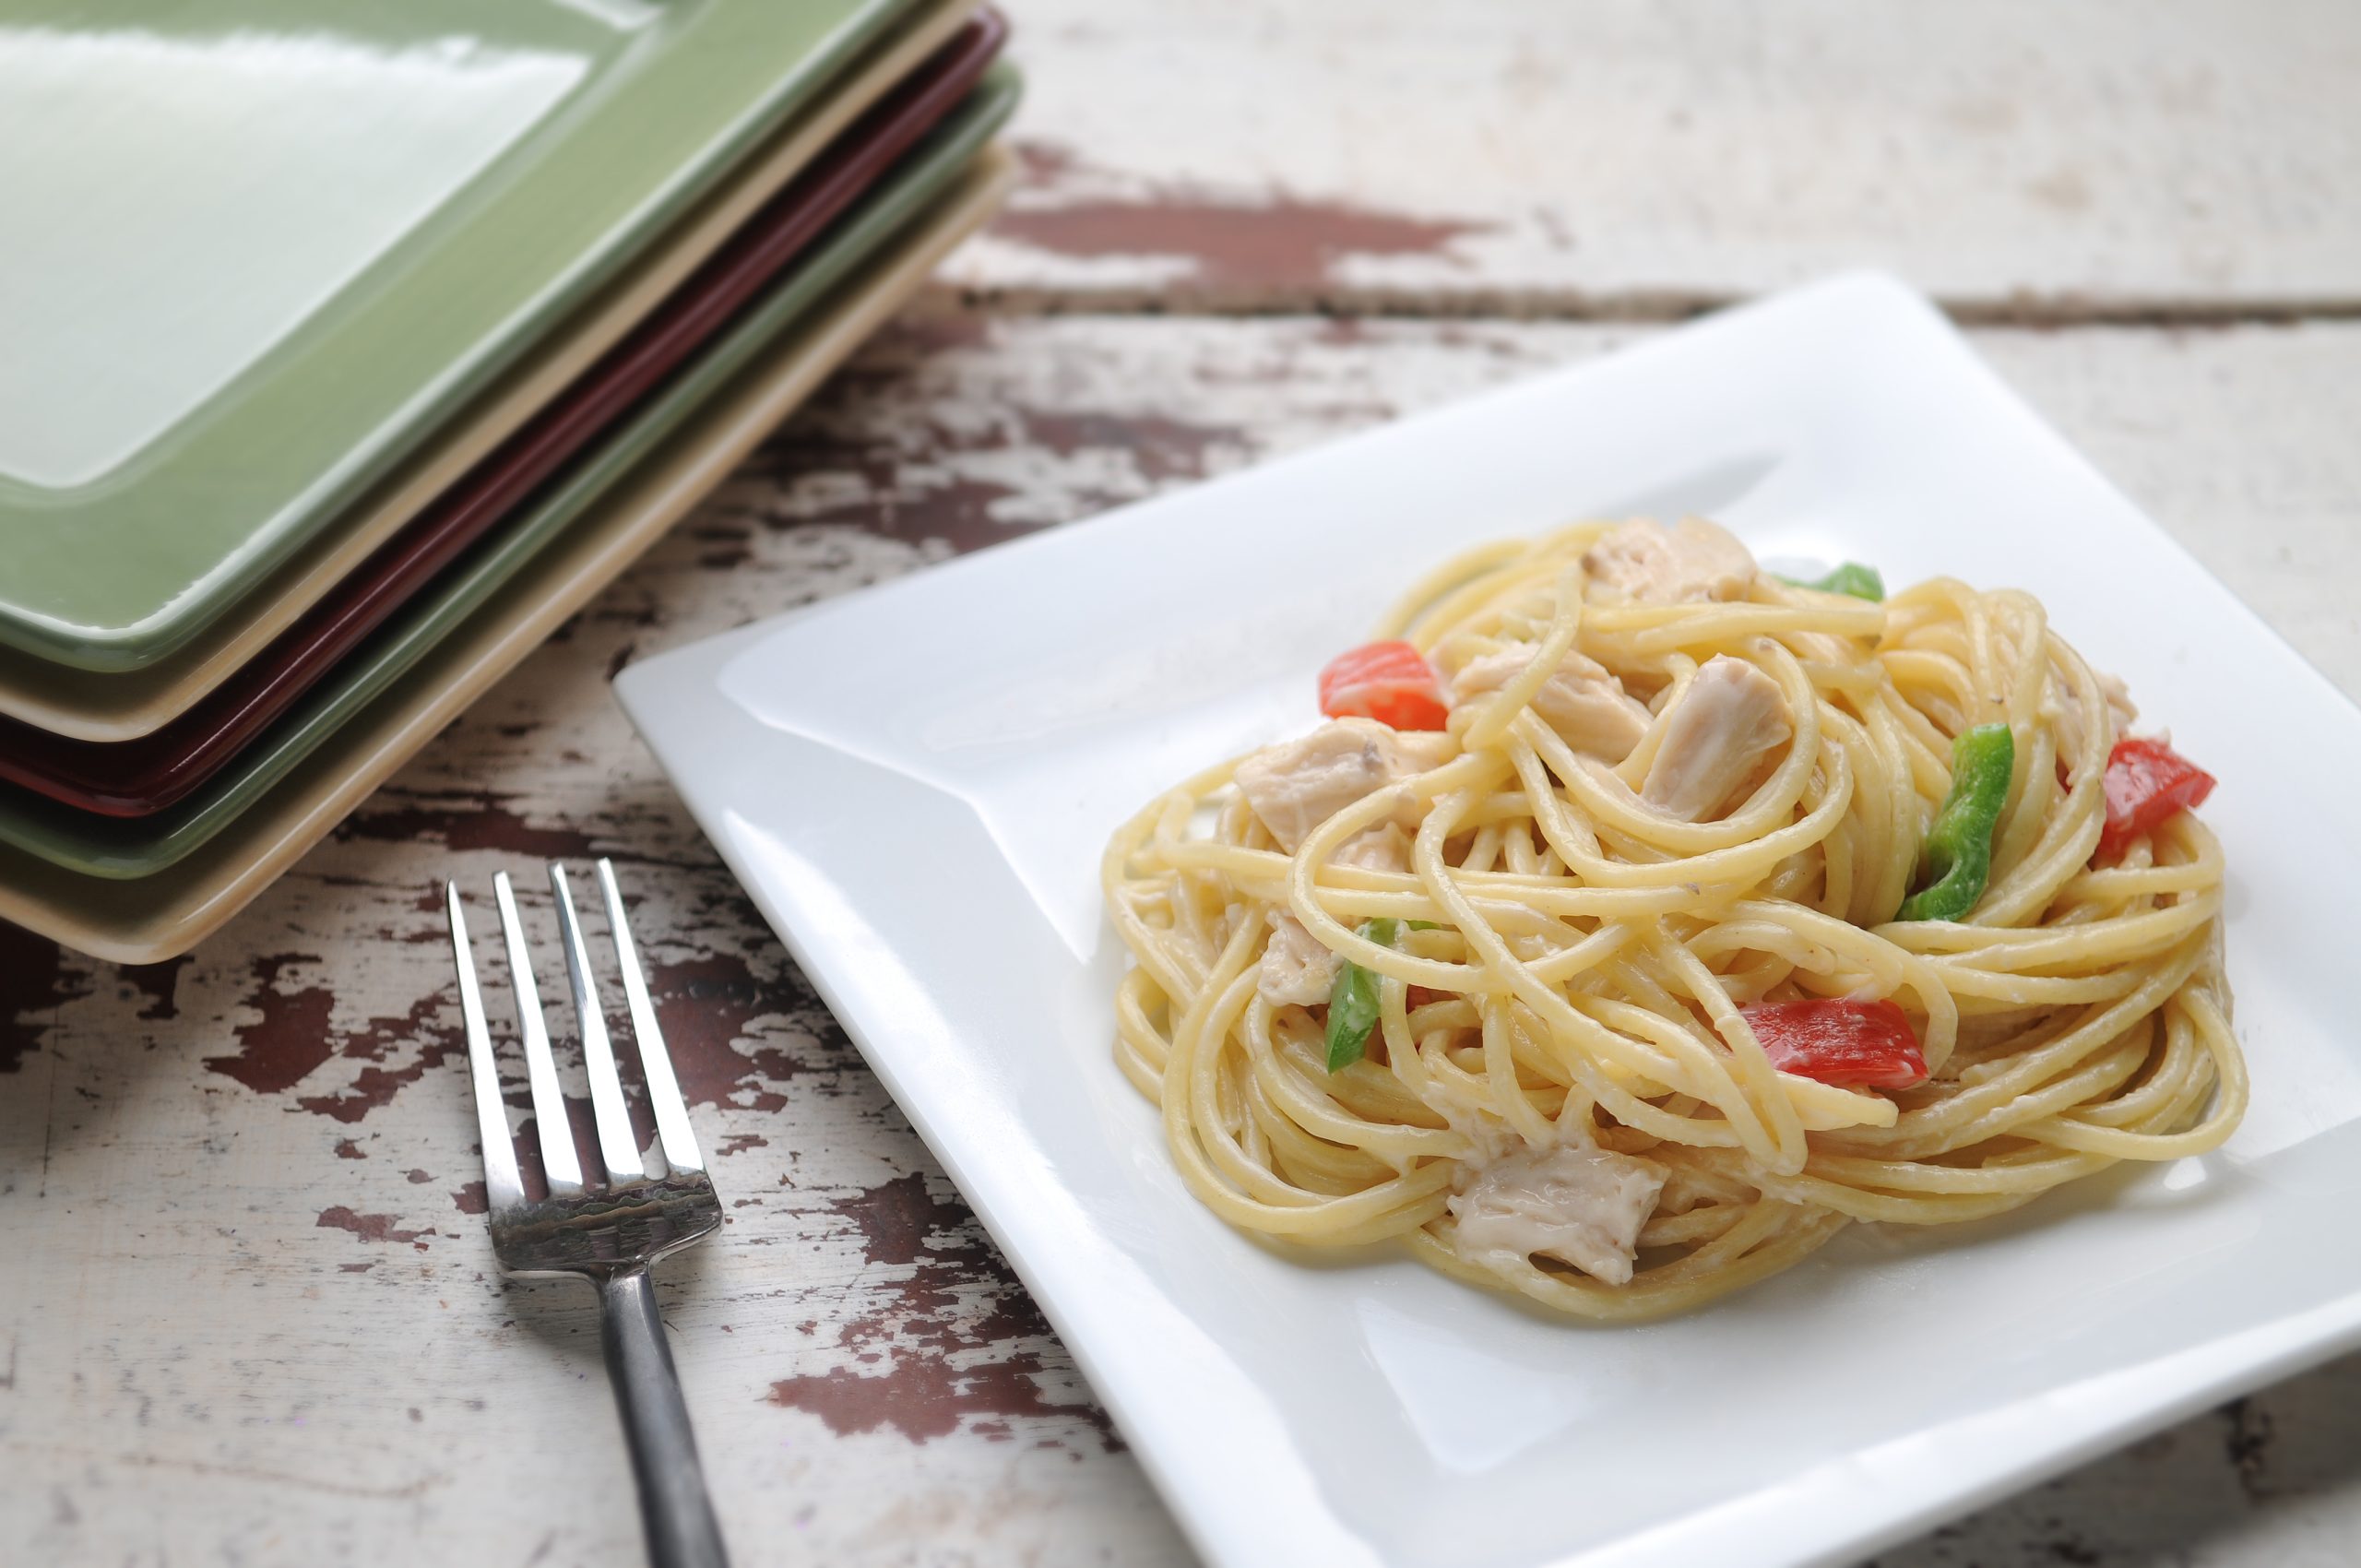 Peppers, chicken, and spaghetti coated in a creamy sauce